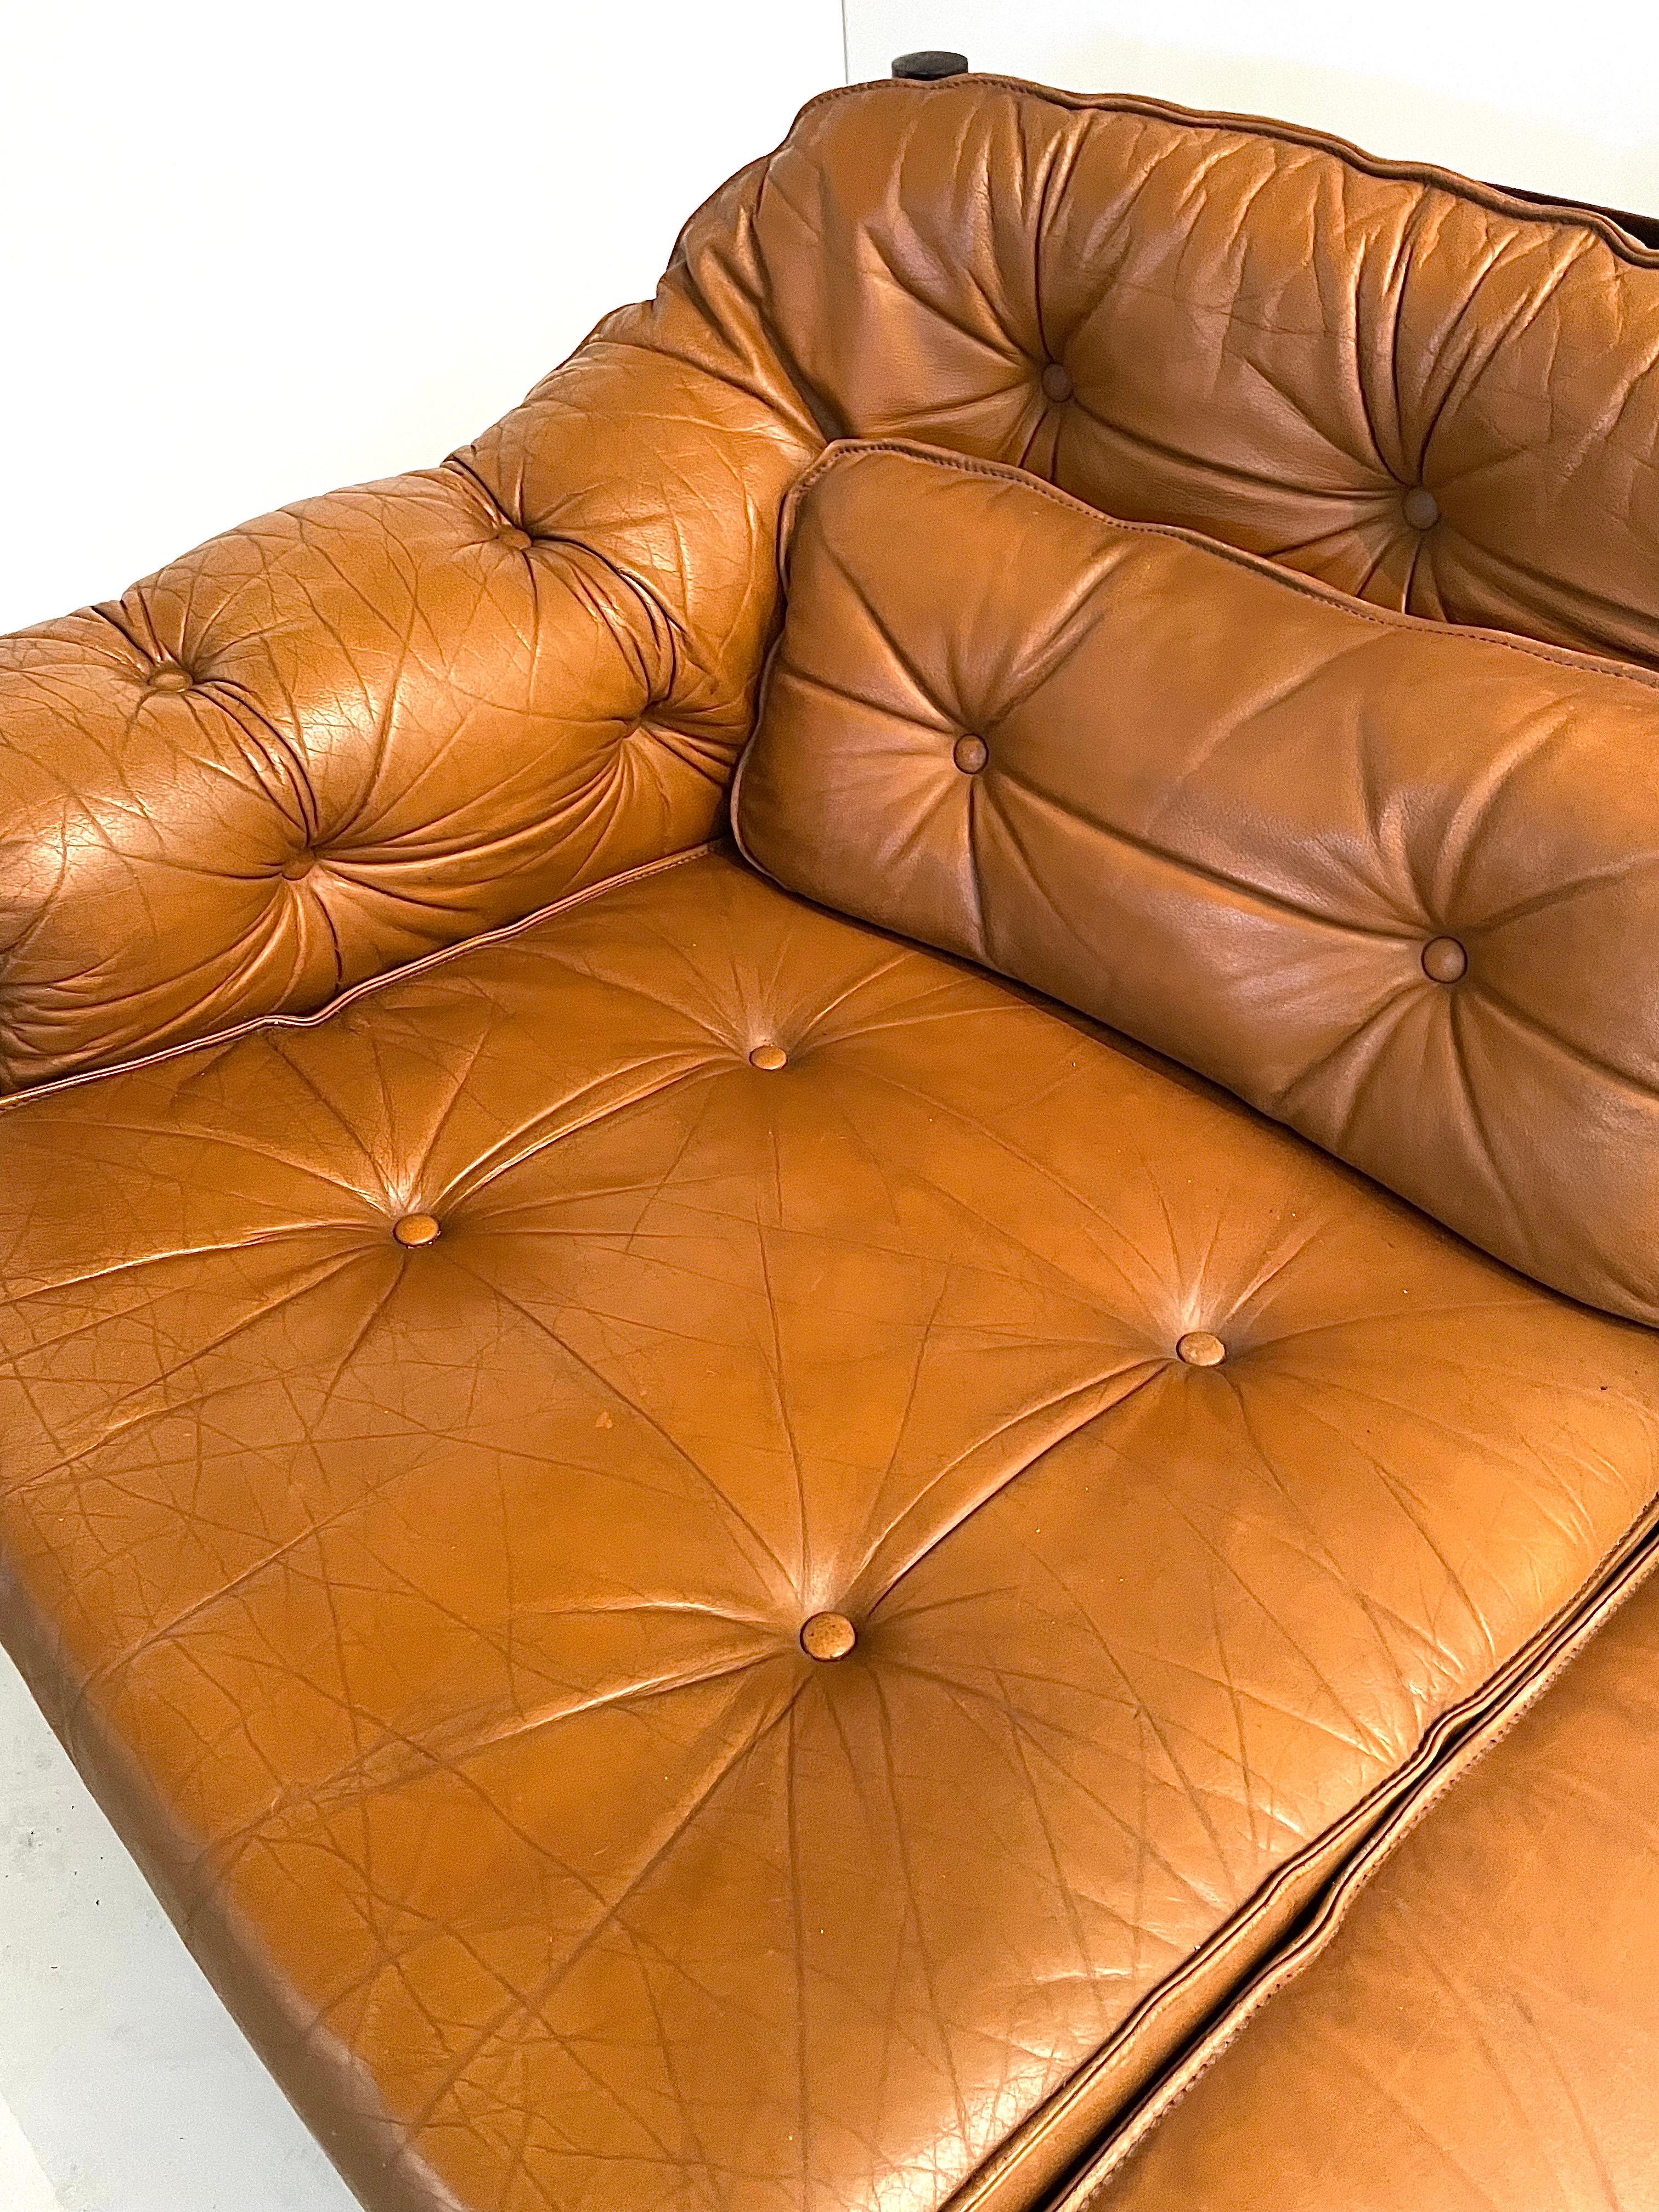 Sven Ellekaer for Coja Two-Seat Settee Sofa in soft Camel Leather For Sale 2